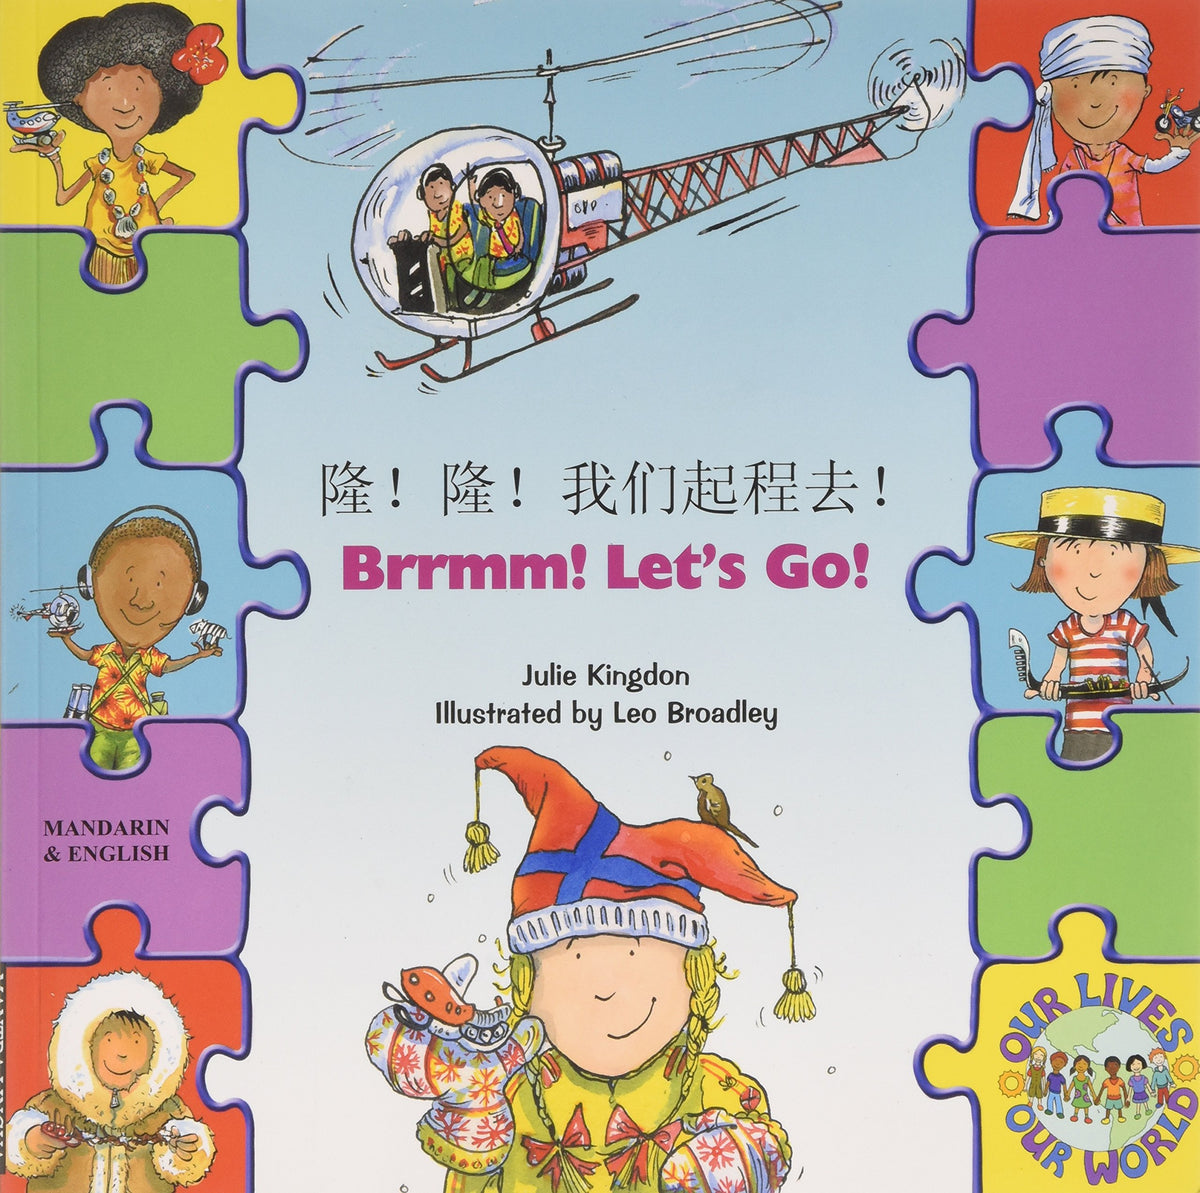 Brrmm! Let's Go! In Mandarin and English (Our Lives, Our World!)